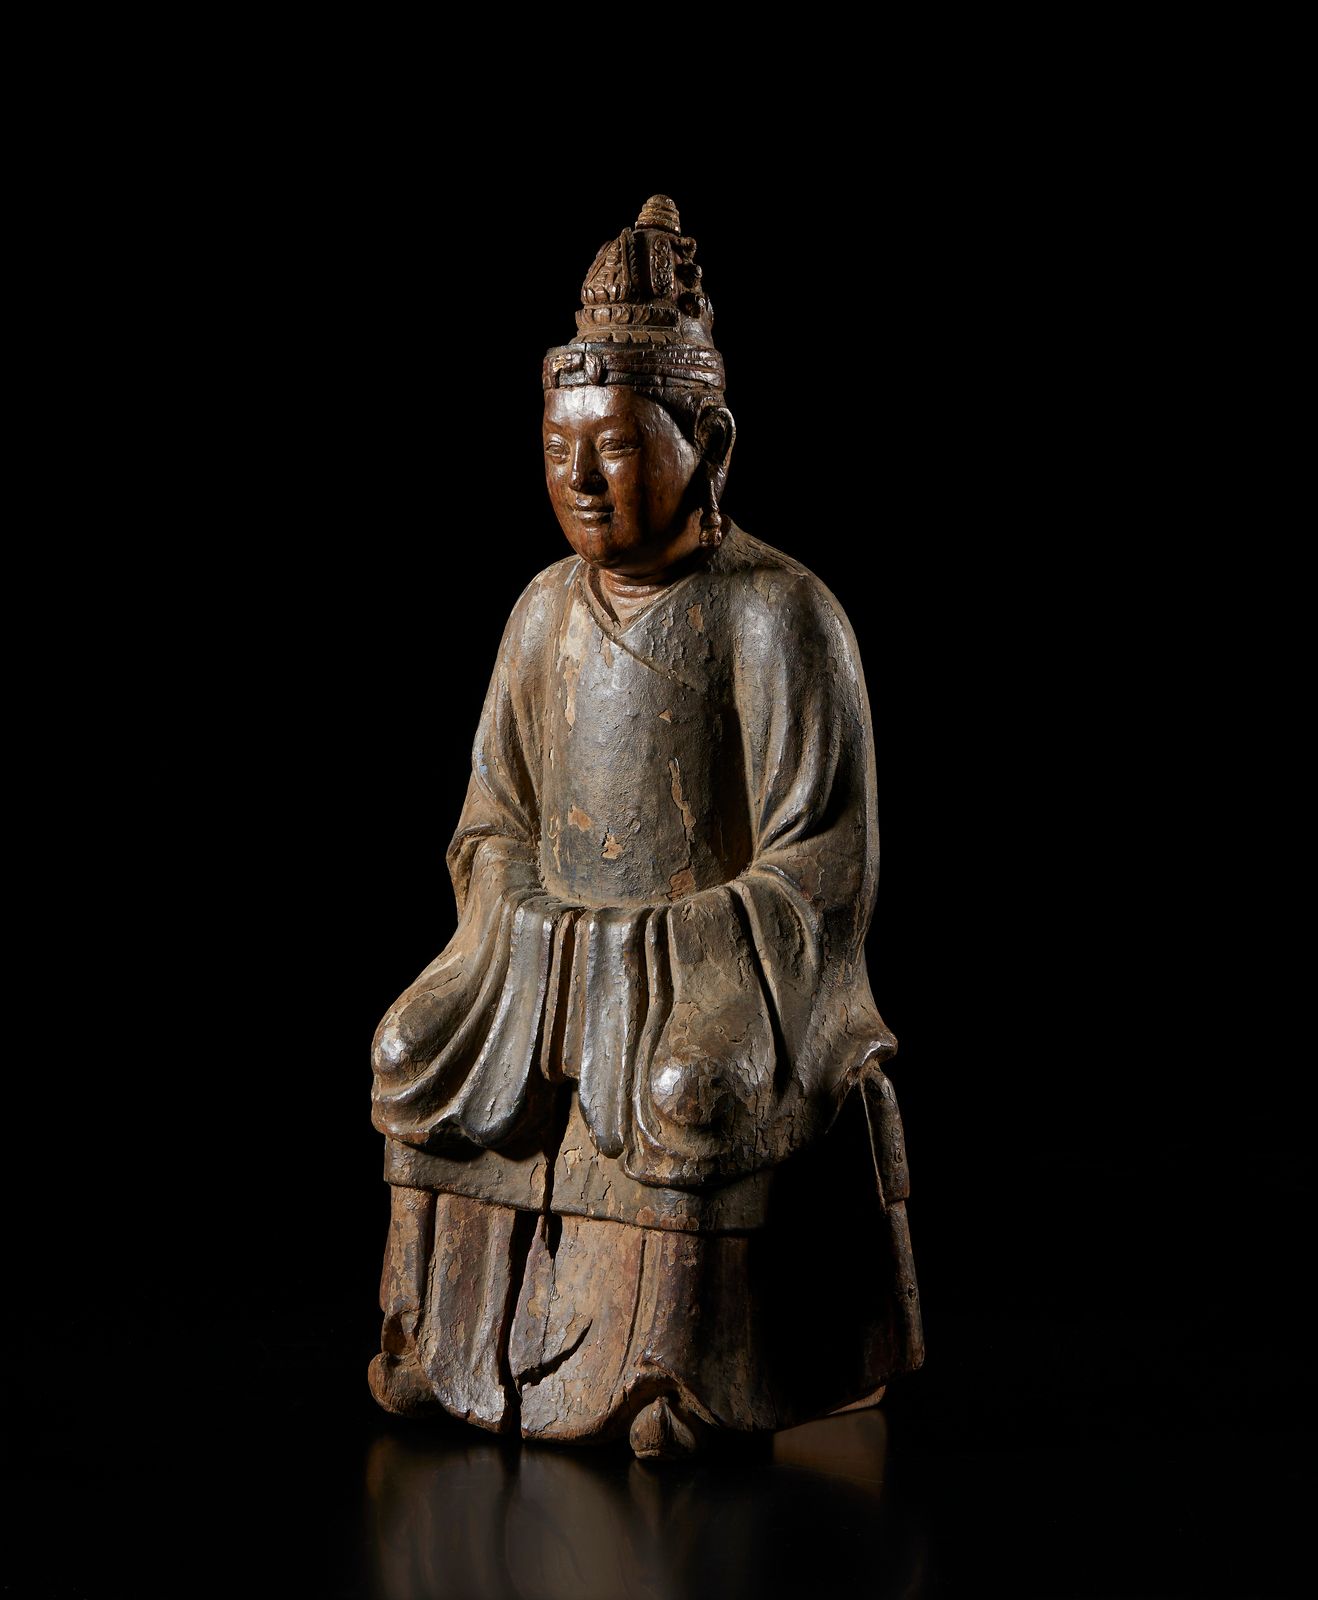 Chinese Art A wooden lacquered figure of a seated dignitary 中国艺术。一个木质漆面的贵族坐像 中国，&hellip;